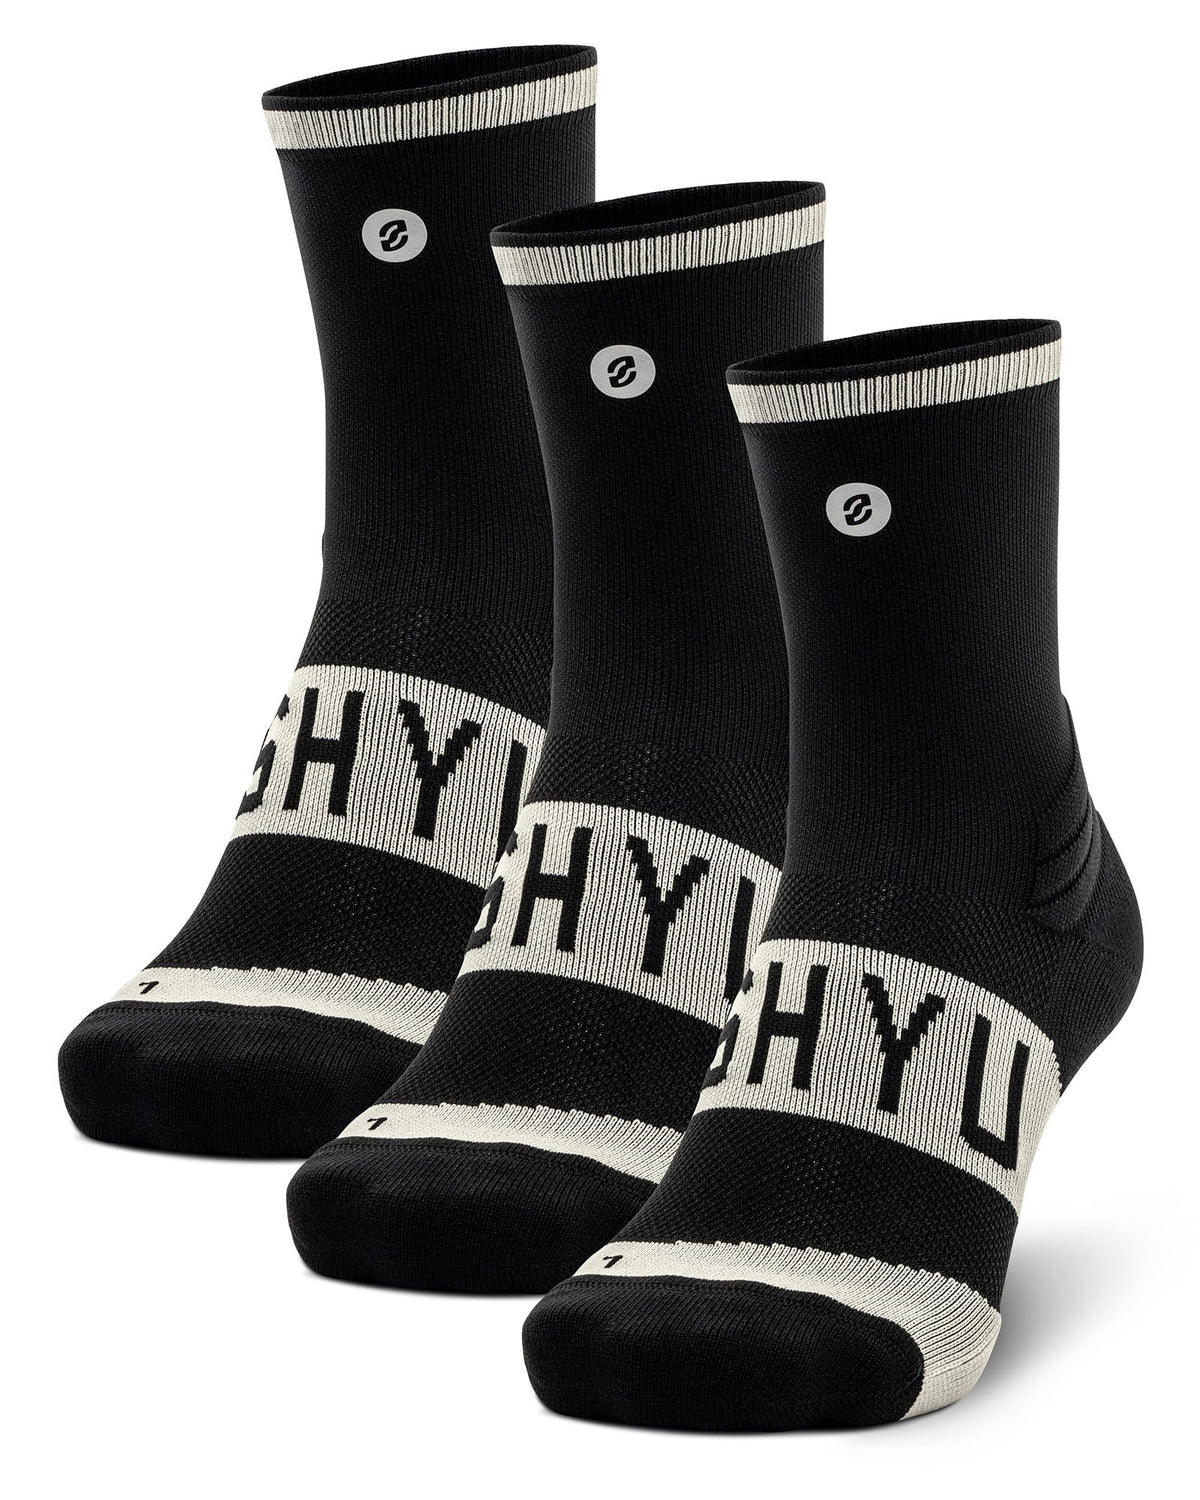 Chaussettes Socks HOWA OLYMPIC- Chaussettes design tous sport